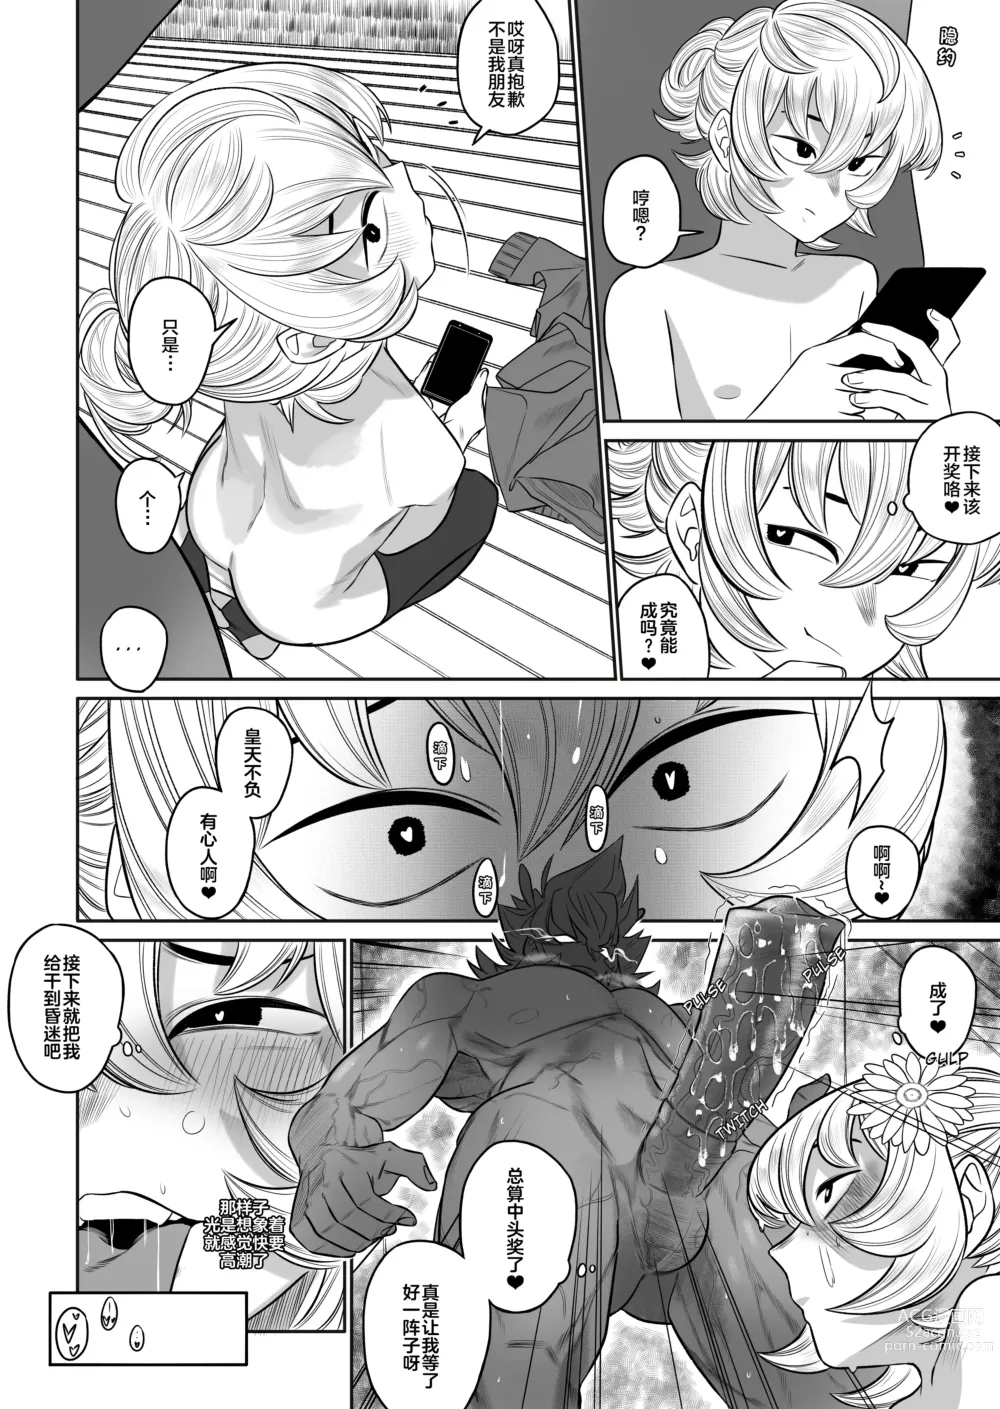 Page 16 of doujinshi 狡猾小恶魔